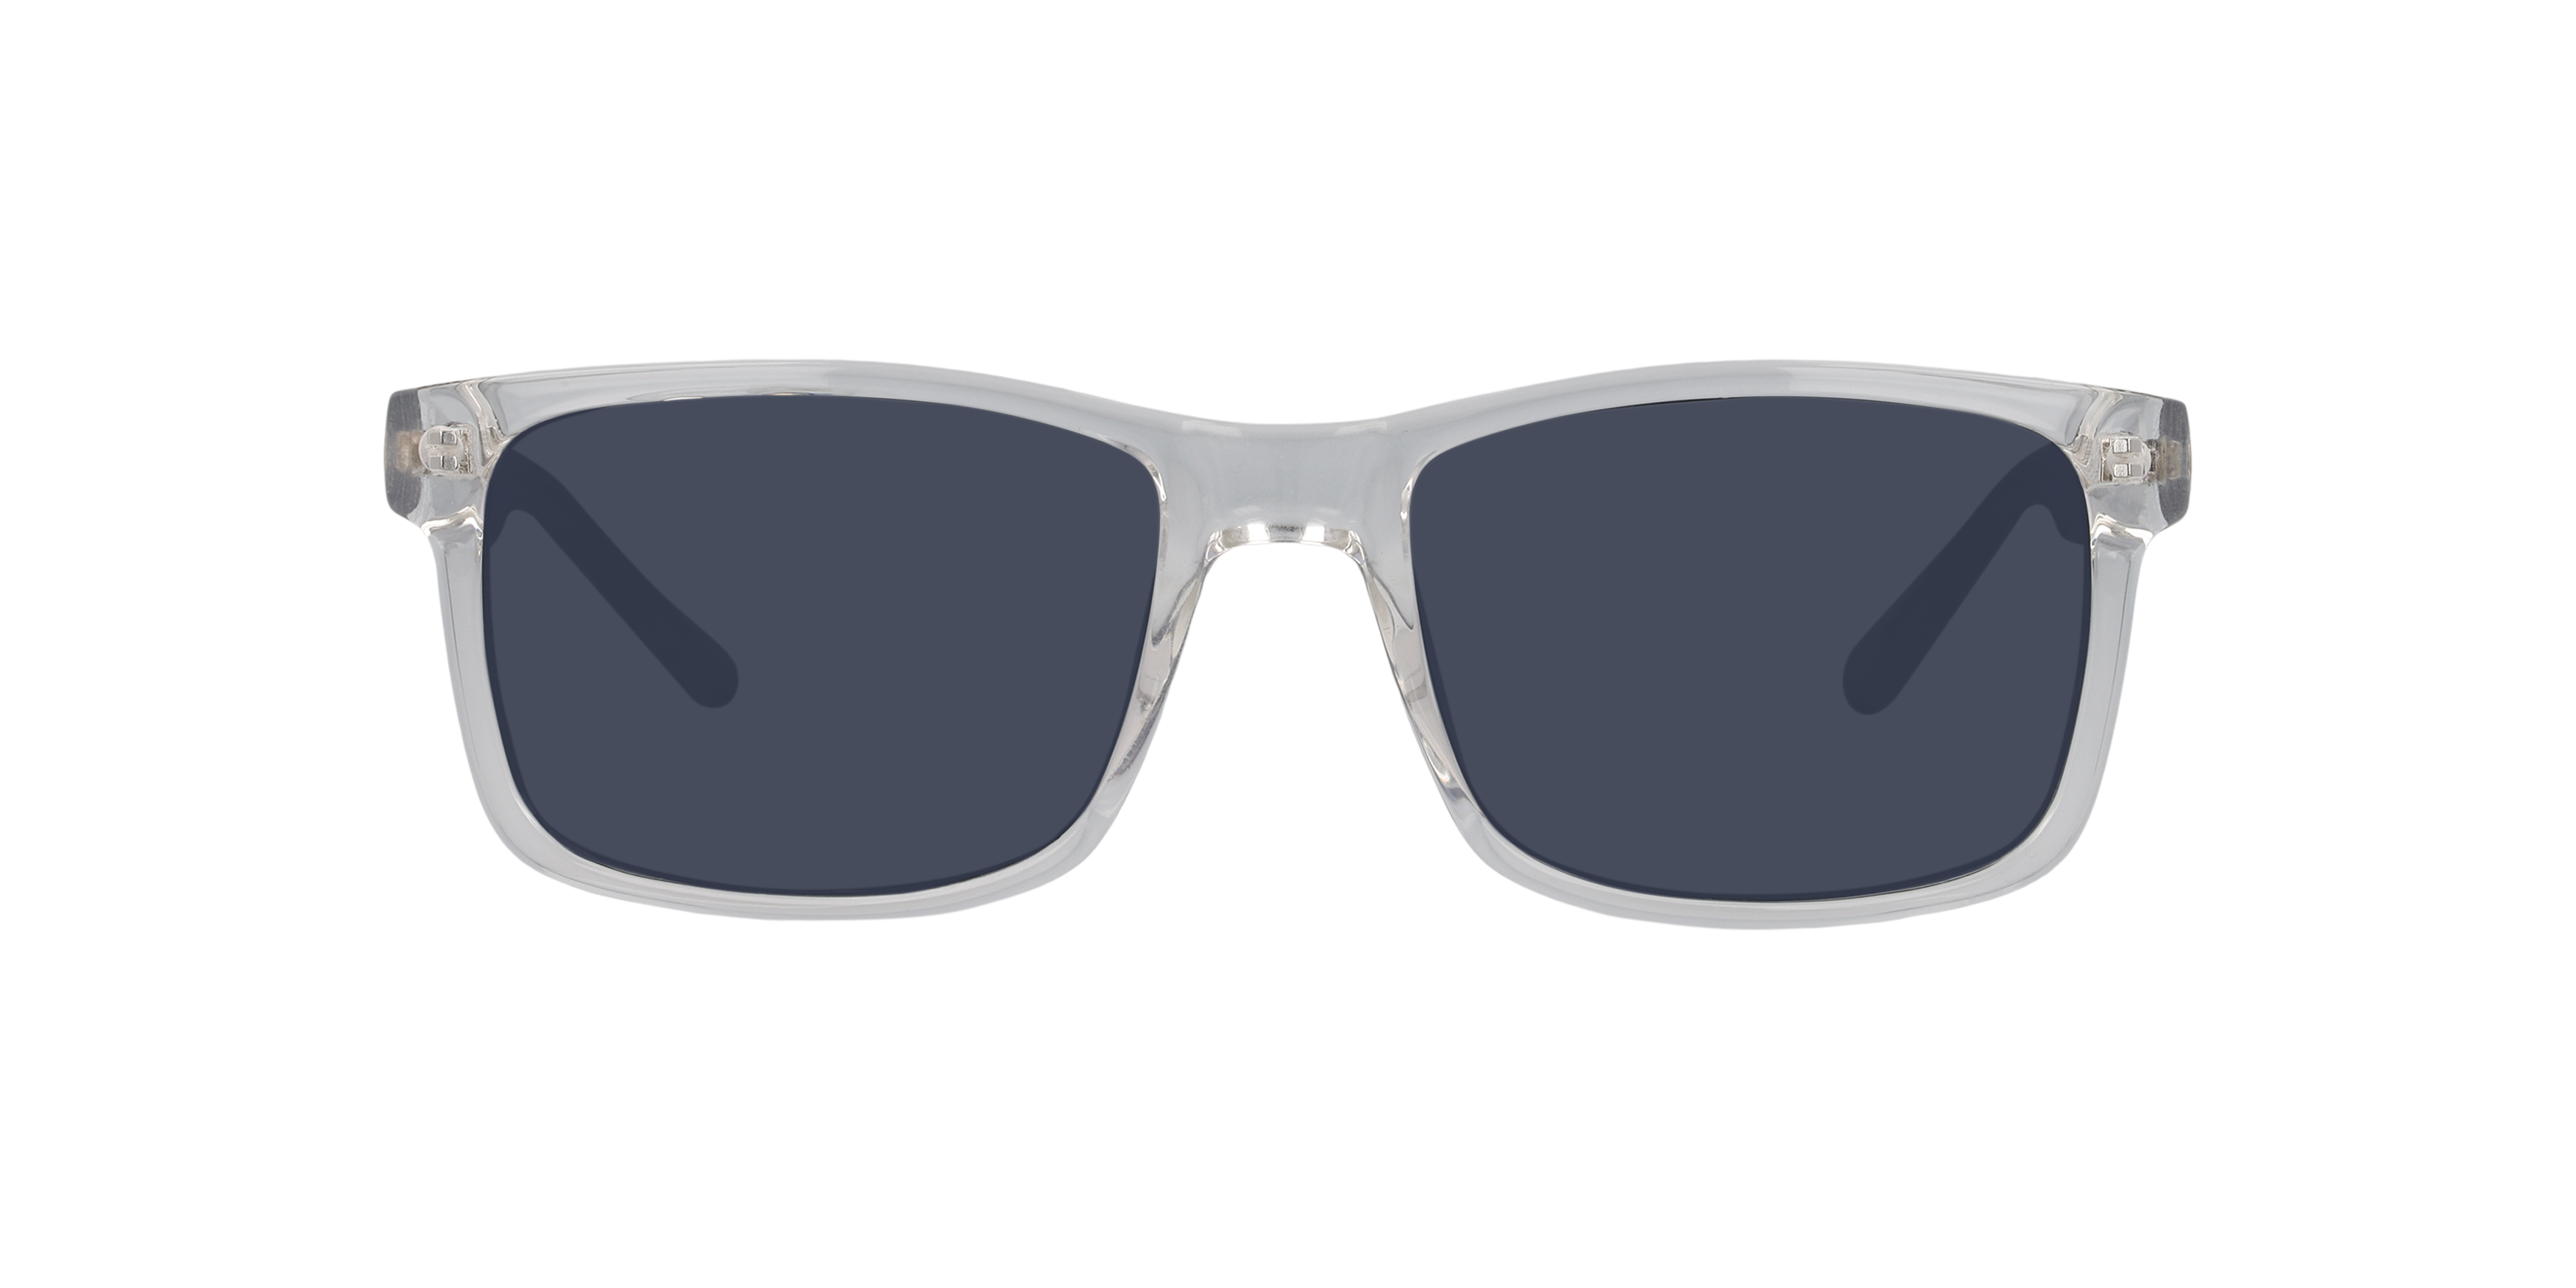 [products.image.front] Seen NE 6009 Sunglasses